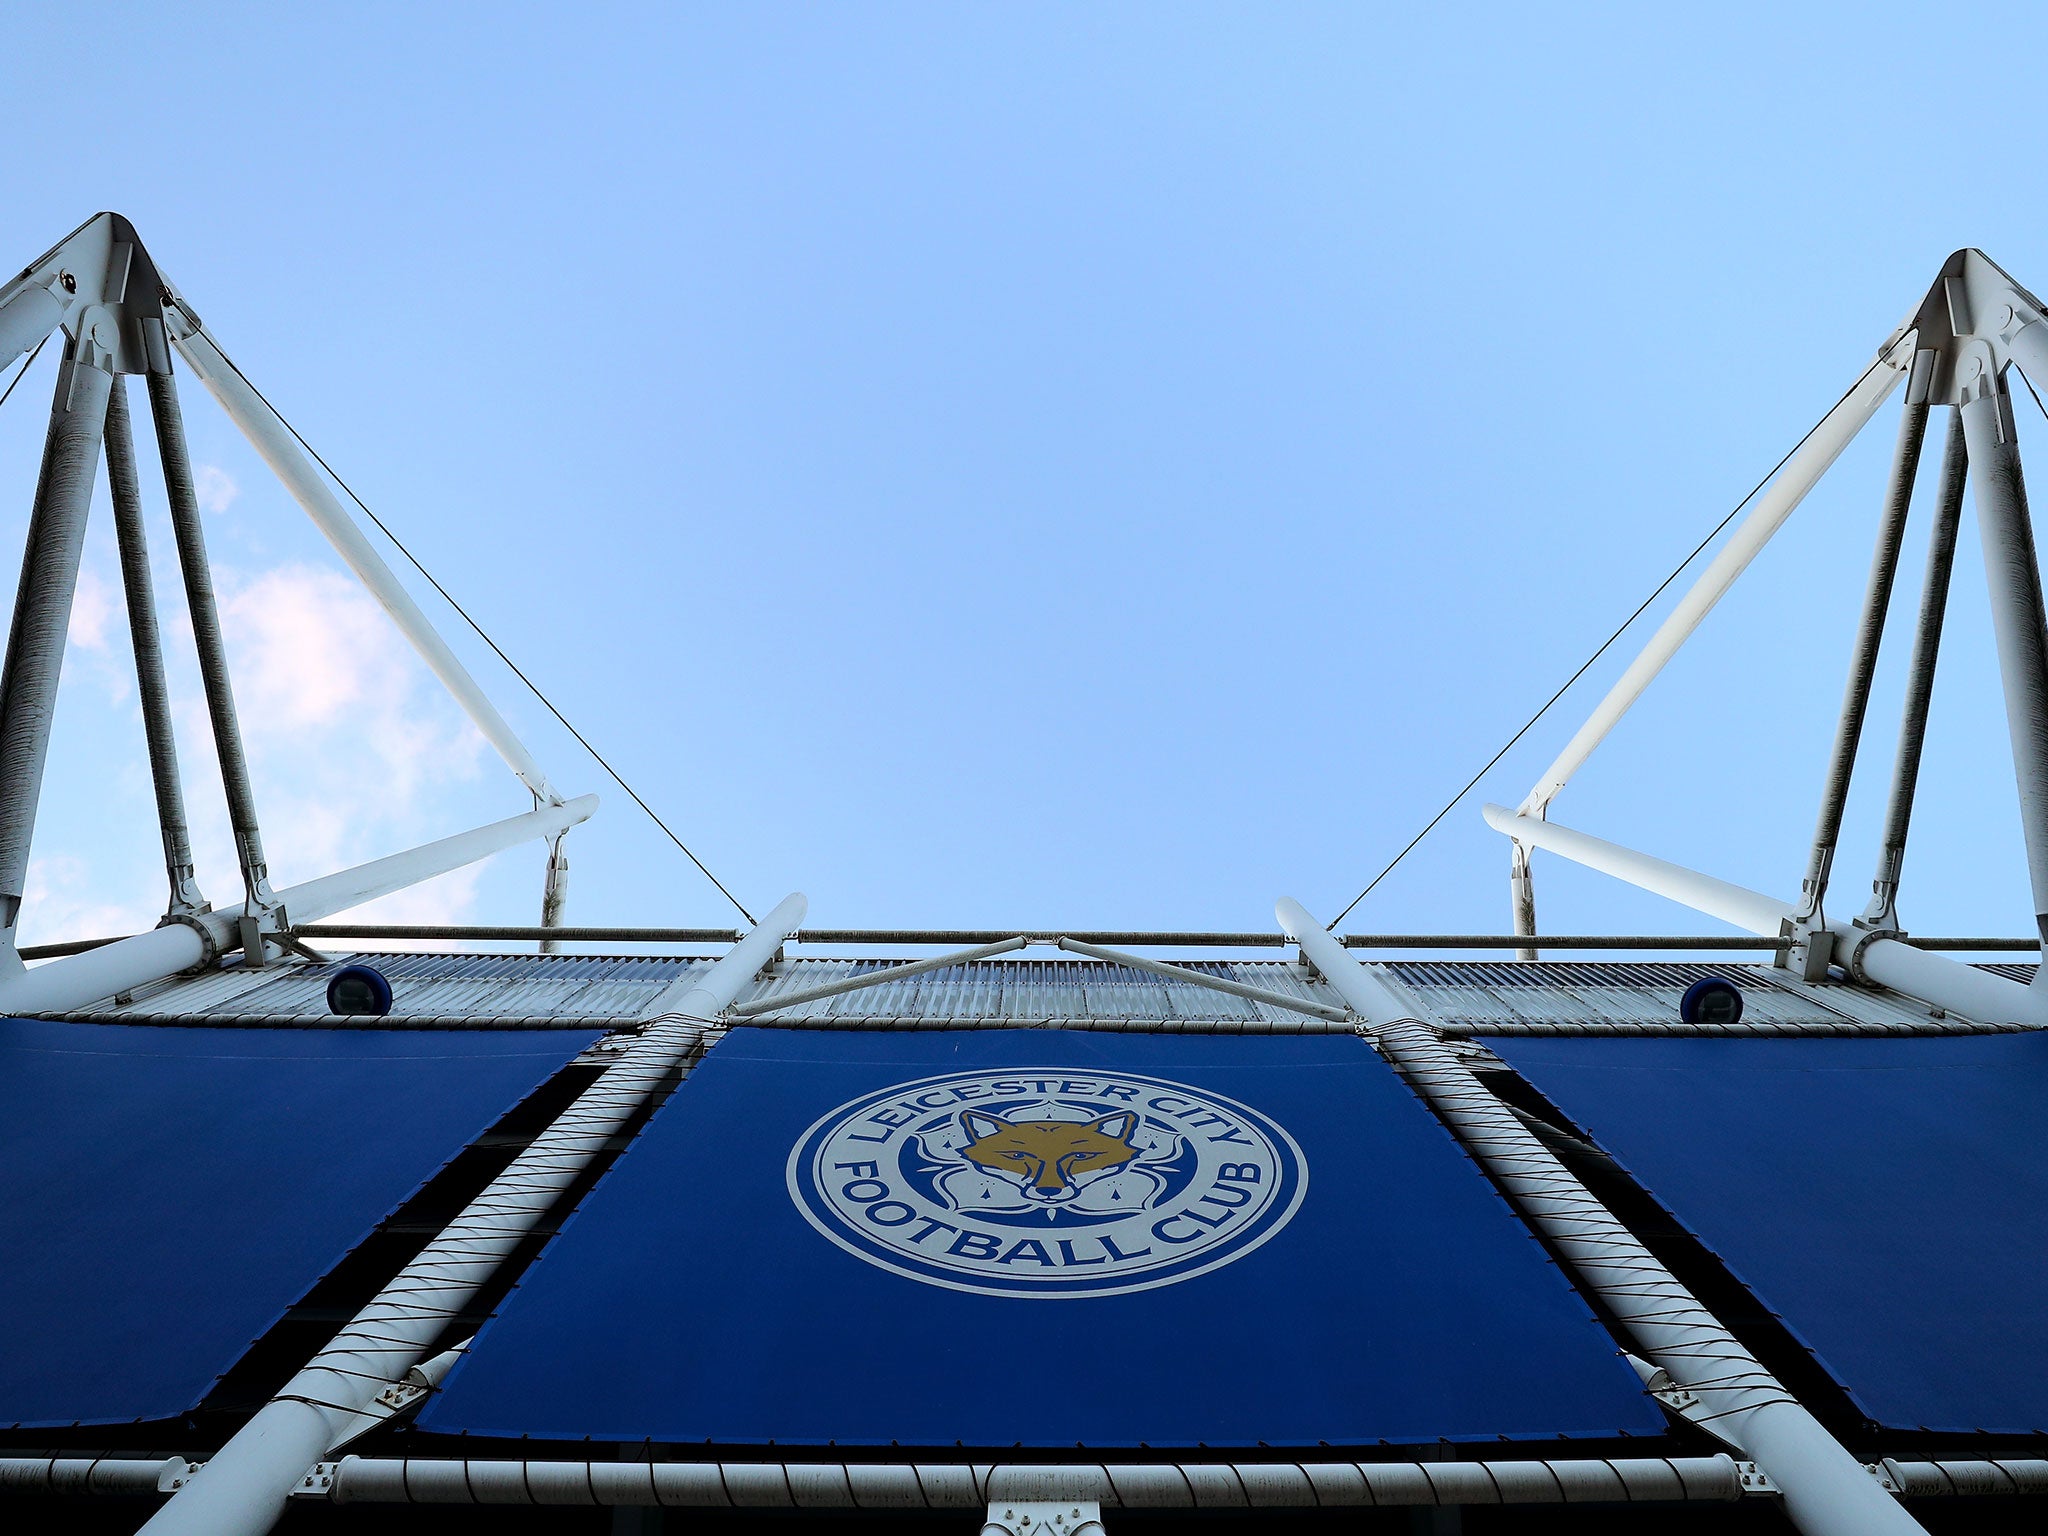 Leicester host Leeds at the King Power Stadium